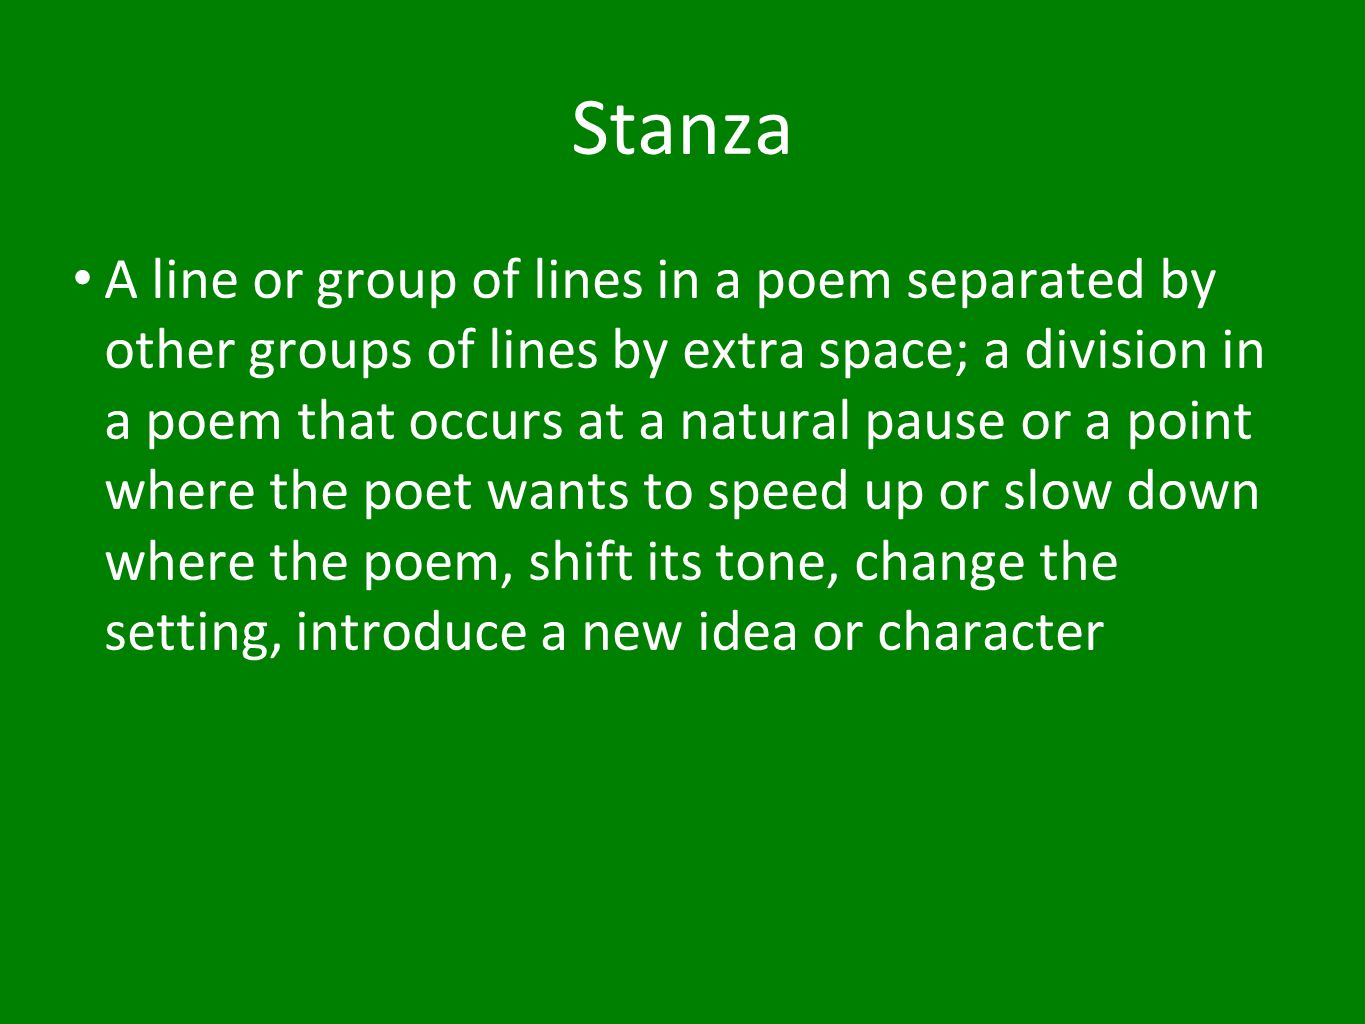 Stanza A line or group of lines in a poem separated by other groups of lines by extra space; a division in a poem that occurs at a natural pause or a point where the poet wants to speed up or slow down where the poem, shift its tone, change the setting, introduce a new idea or character